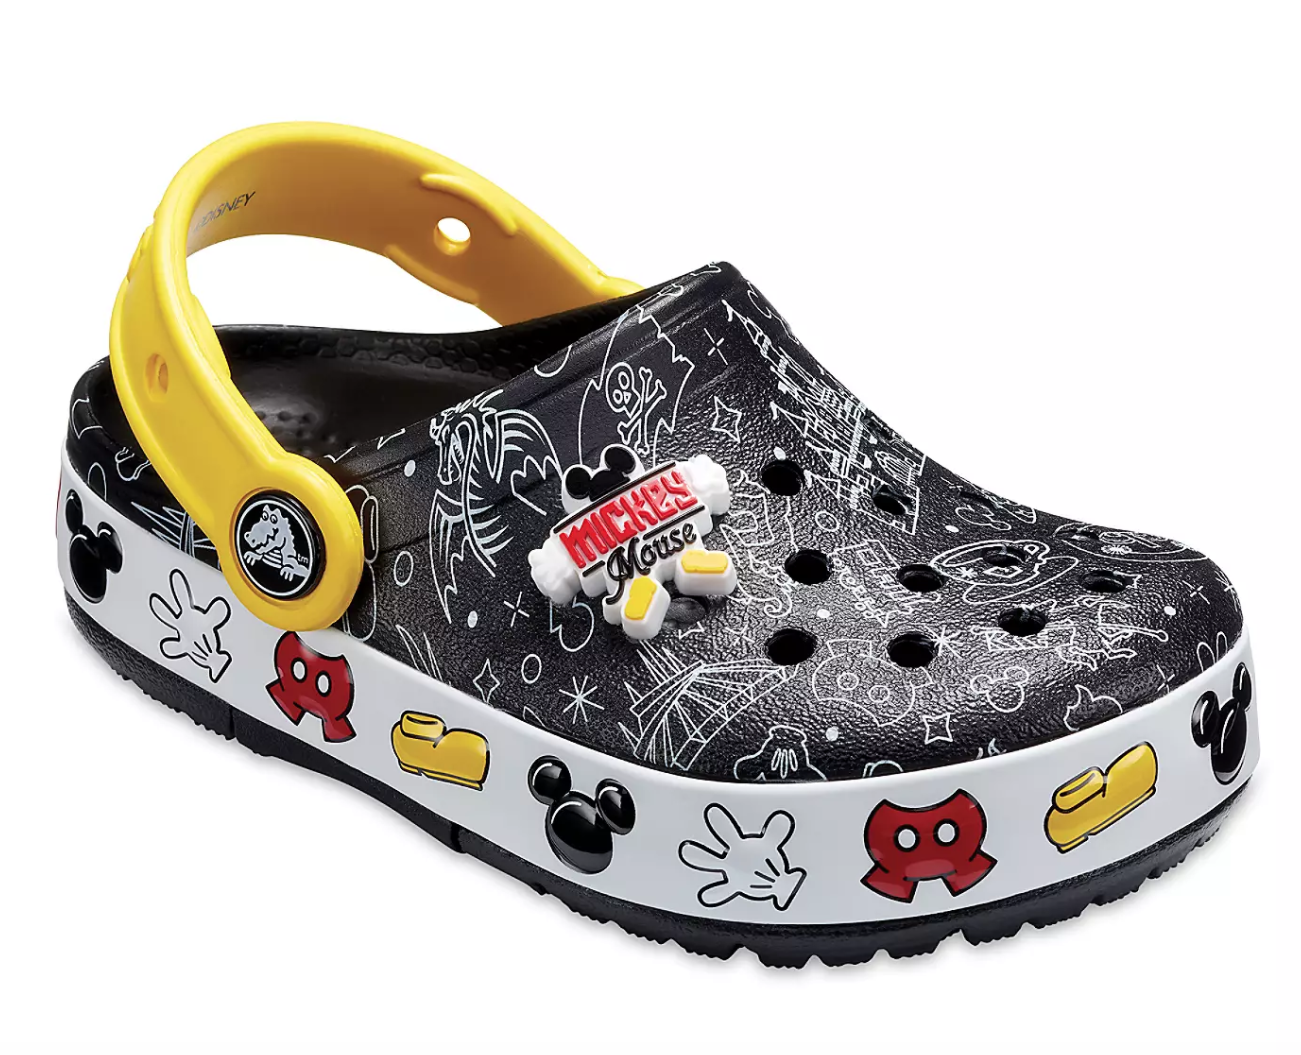 These New Disney and 'Star Wars' Crocs Will Give Your Kids' Park Gear a ...